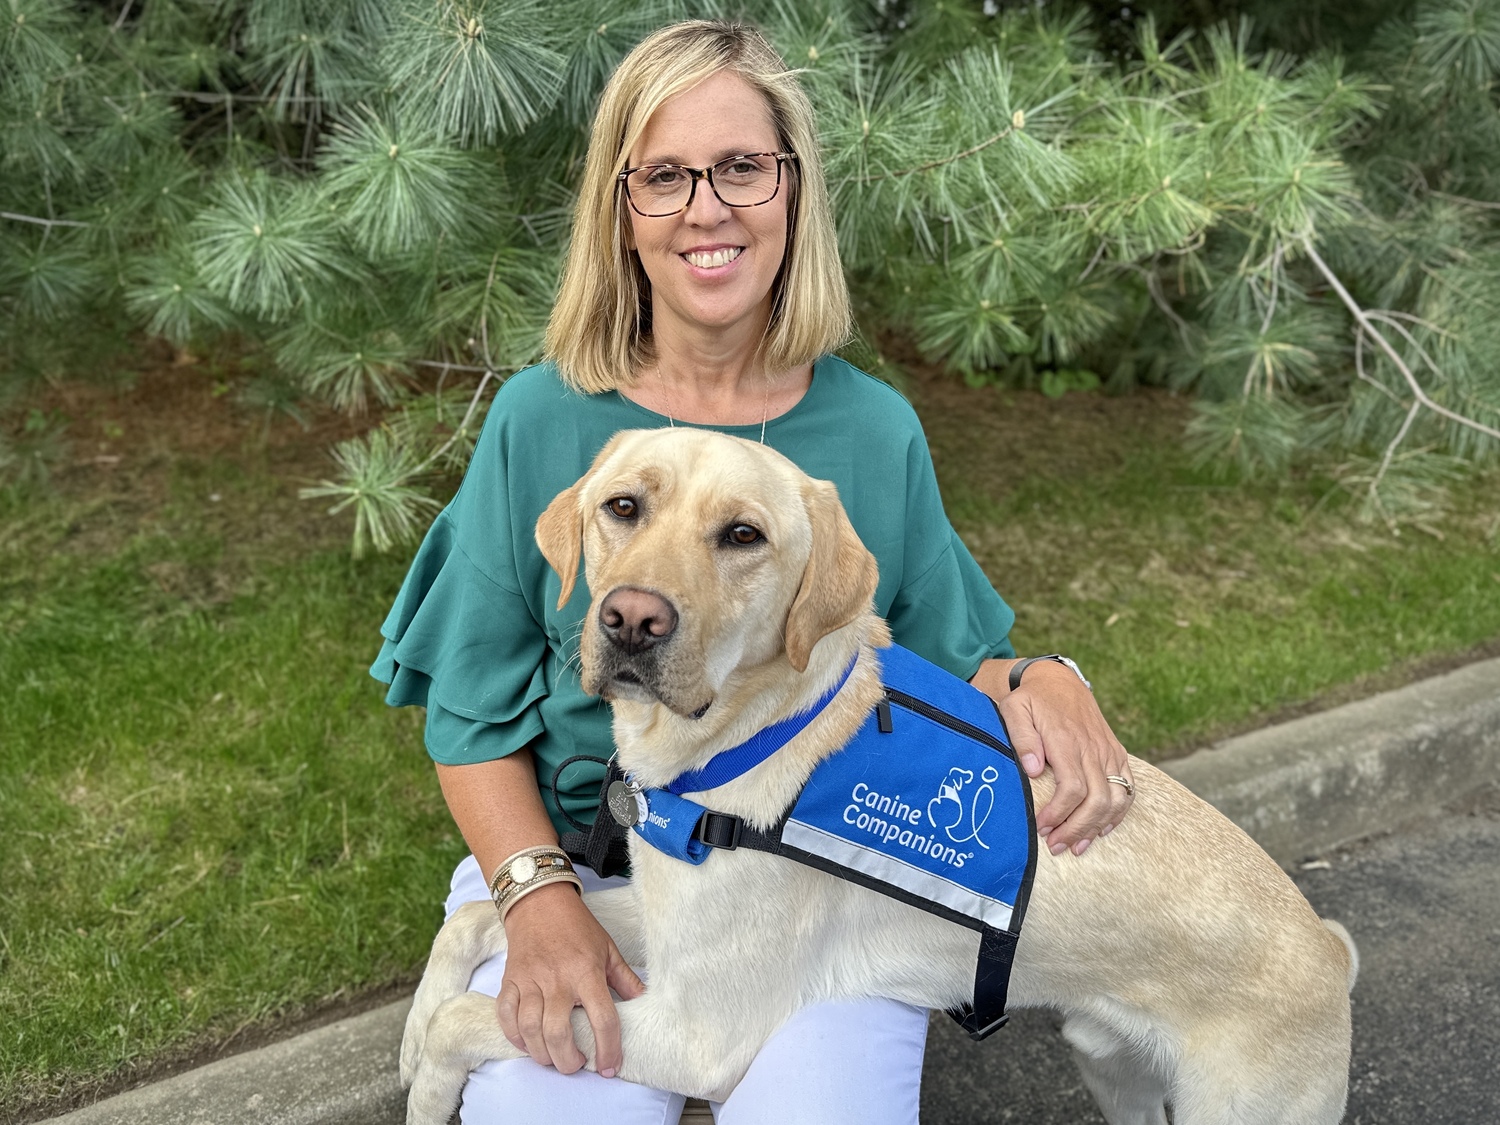 Kate Swezey, a social worker in Westhampton Beach Middle School, with Oric, a dog came to her through the organization Canine Companions, and will serve as a facility dog.